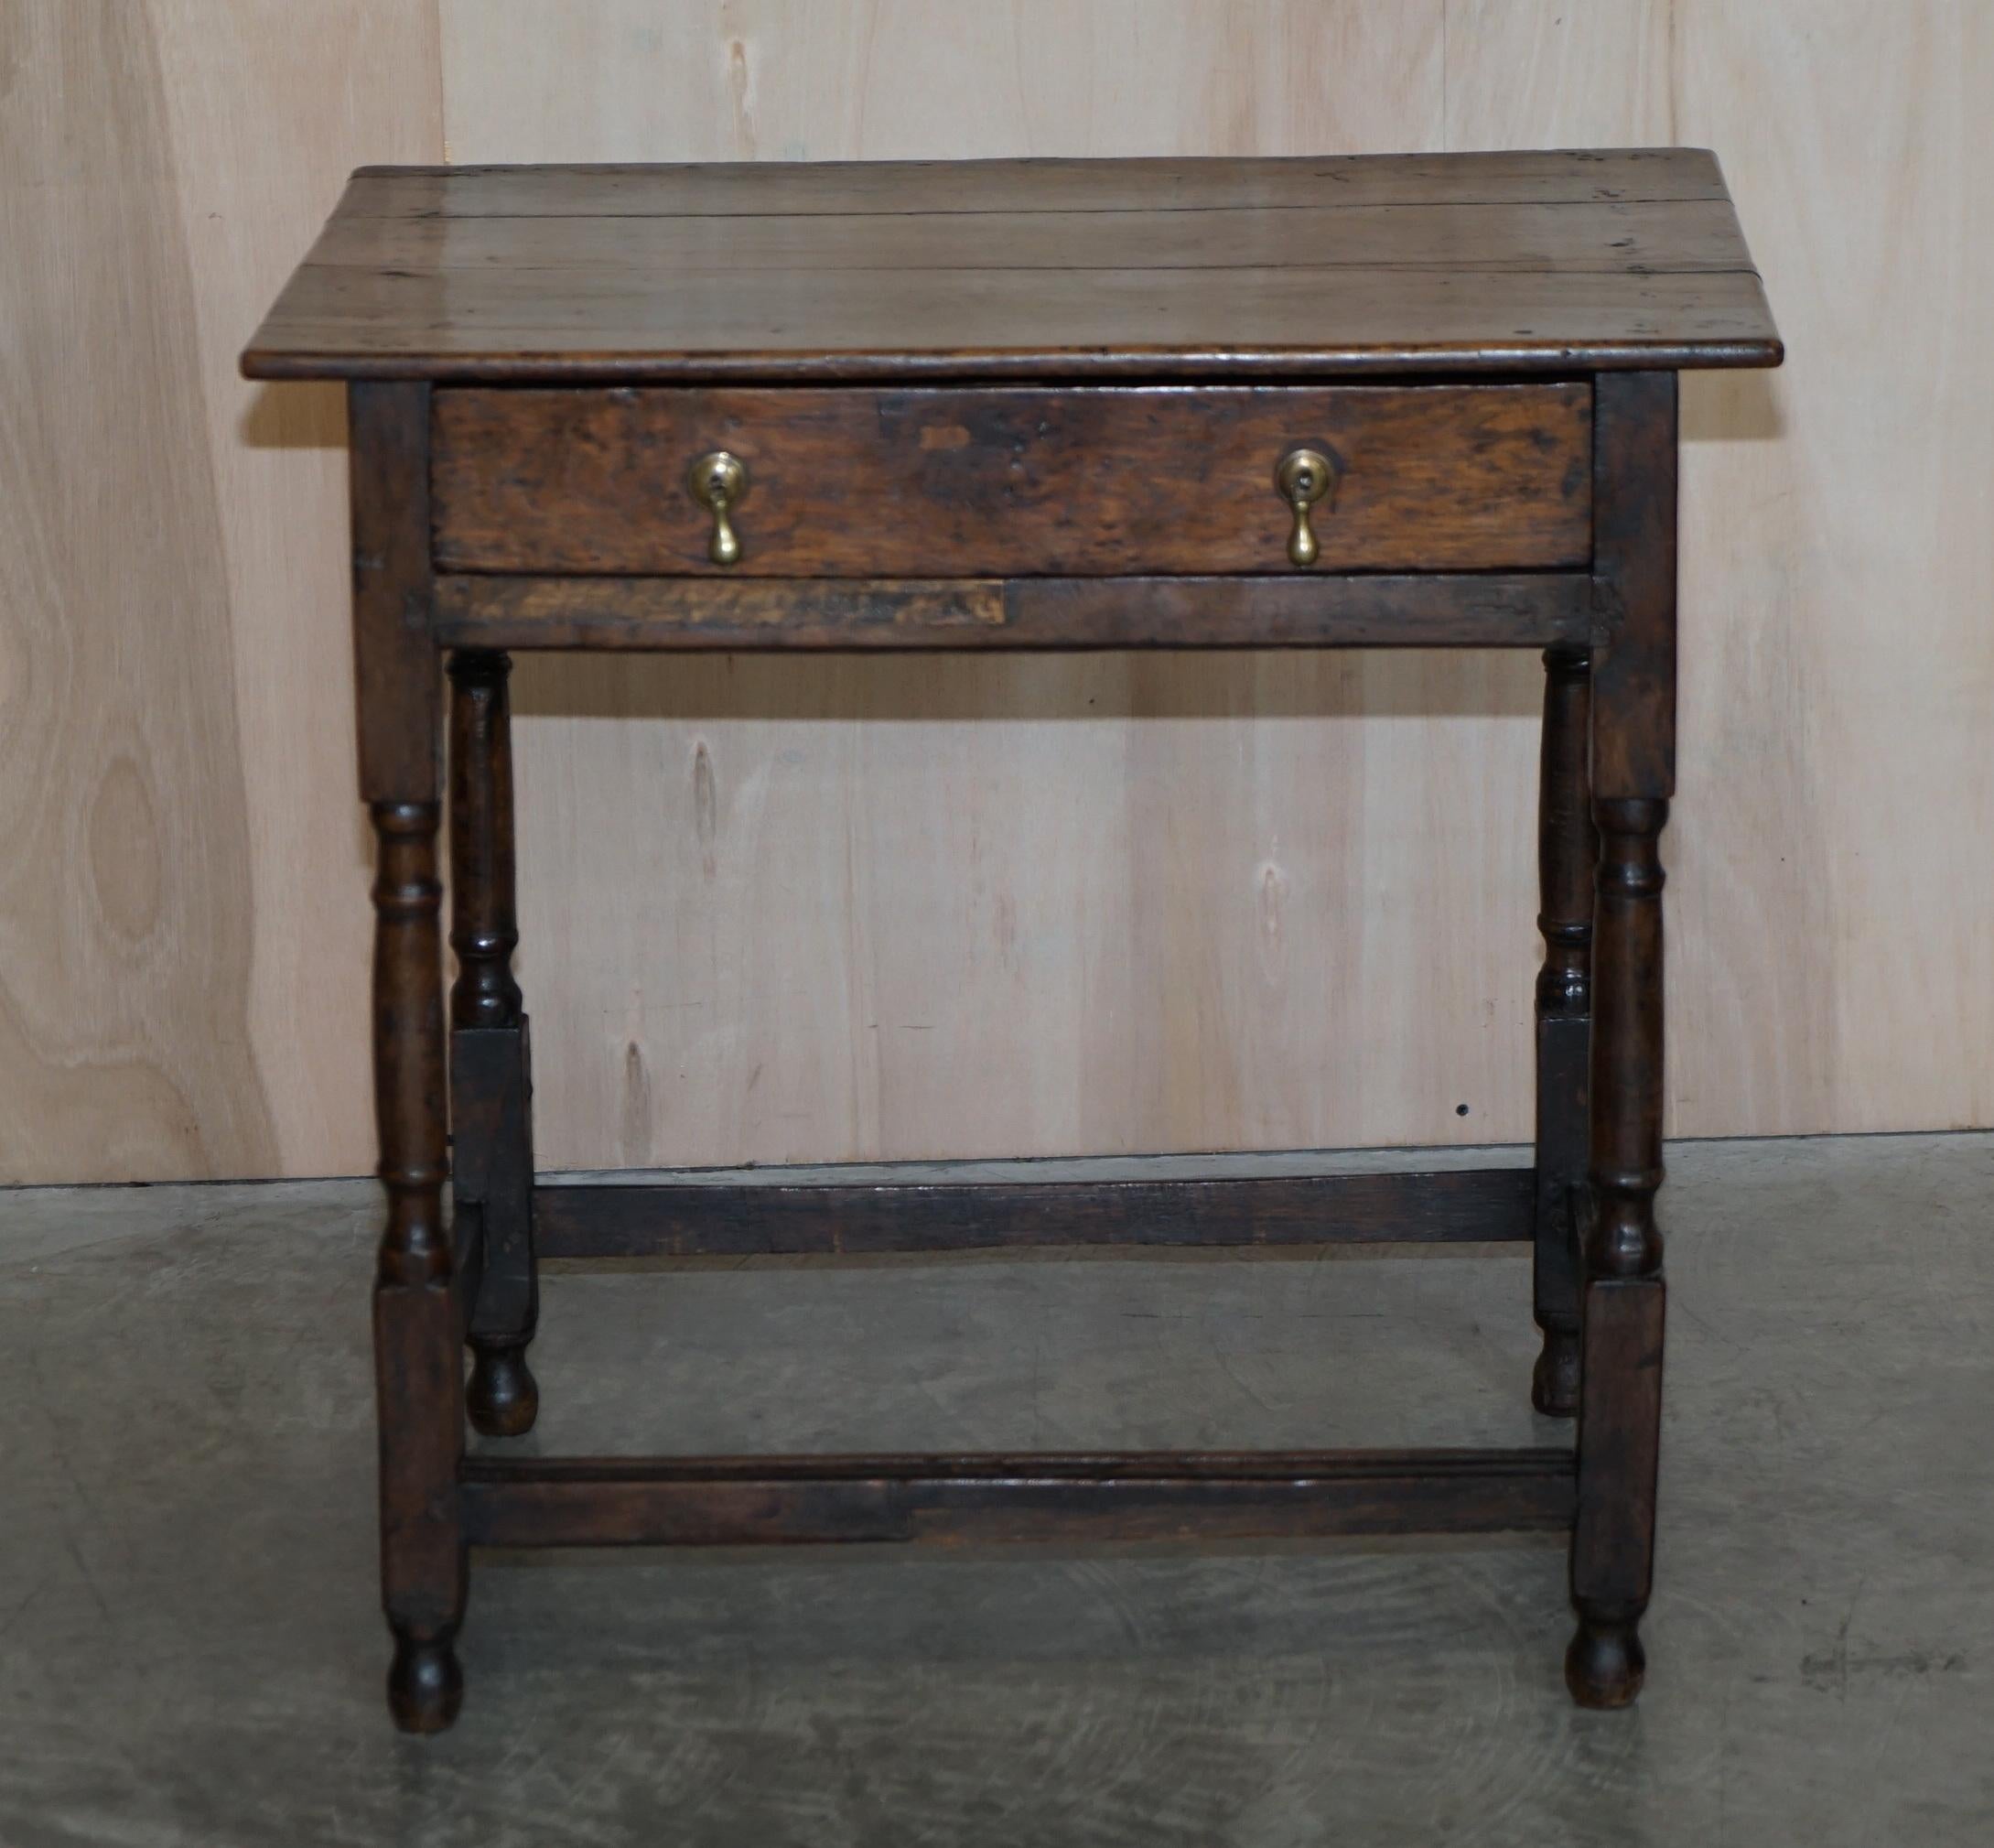 We are delighted to offer for sale this really quite a lovely hand made in England George II circa 1740 oak single drawer side table.

What a find, I rarely see these tables come through my hands but when I do they are a pleasure to own, this is a